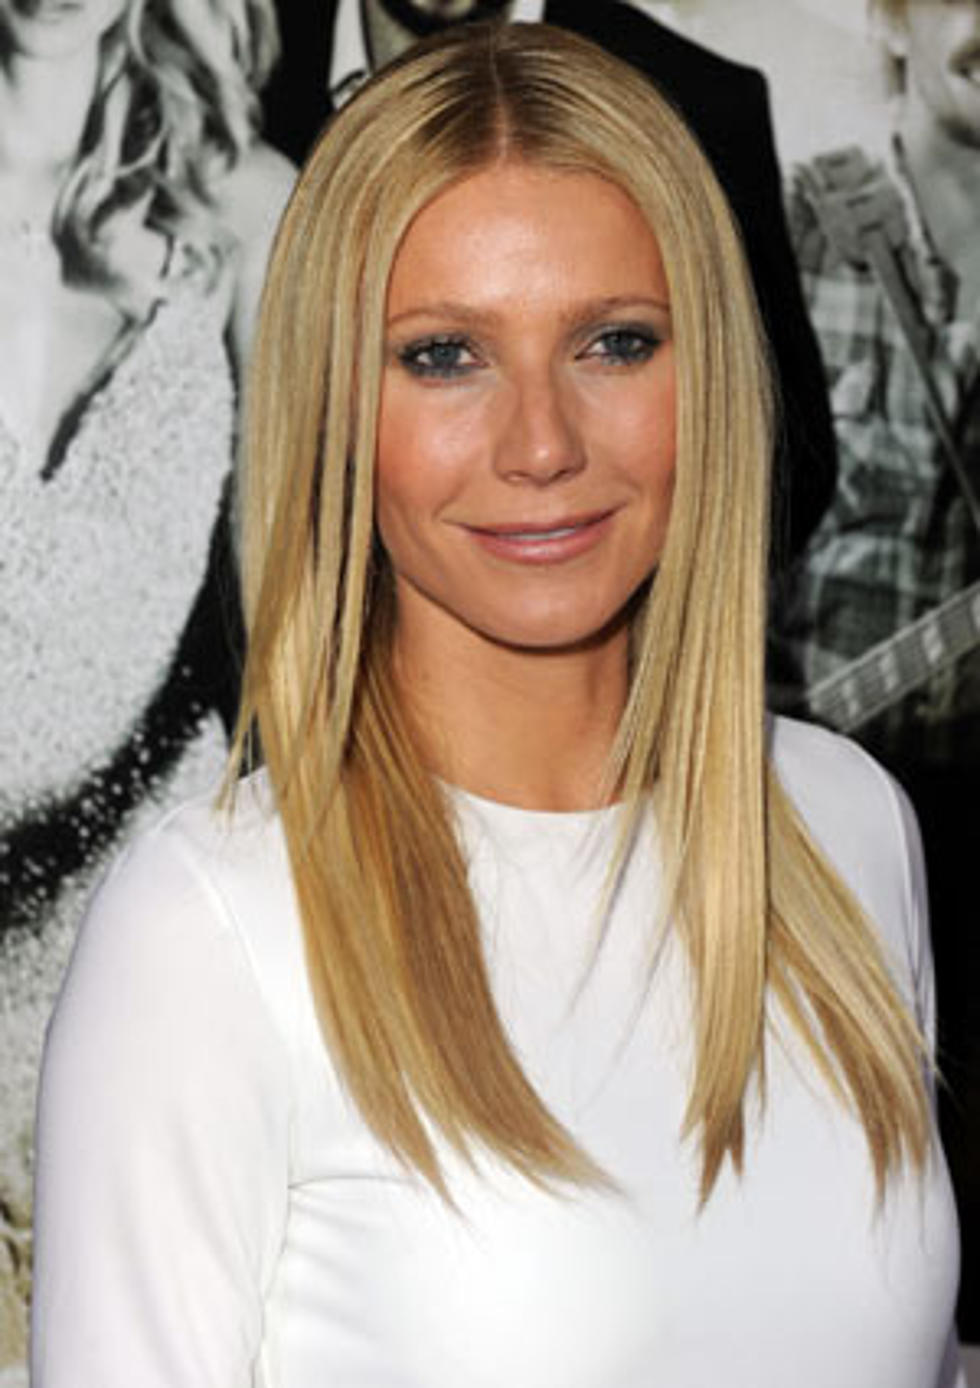 Gwyneth Paltrow Admits: &#8220;I Really Fell in Love With Country Music&#8221;